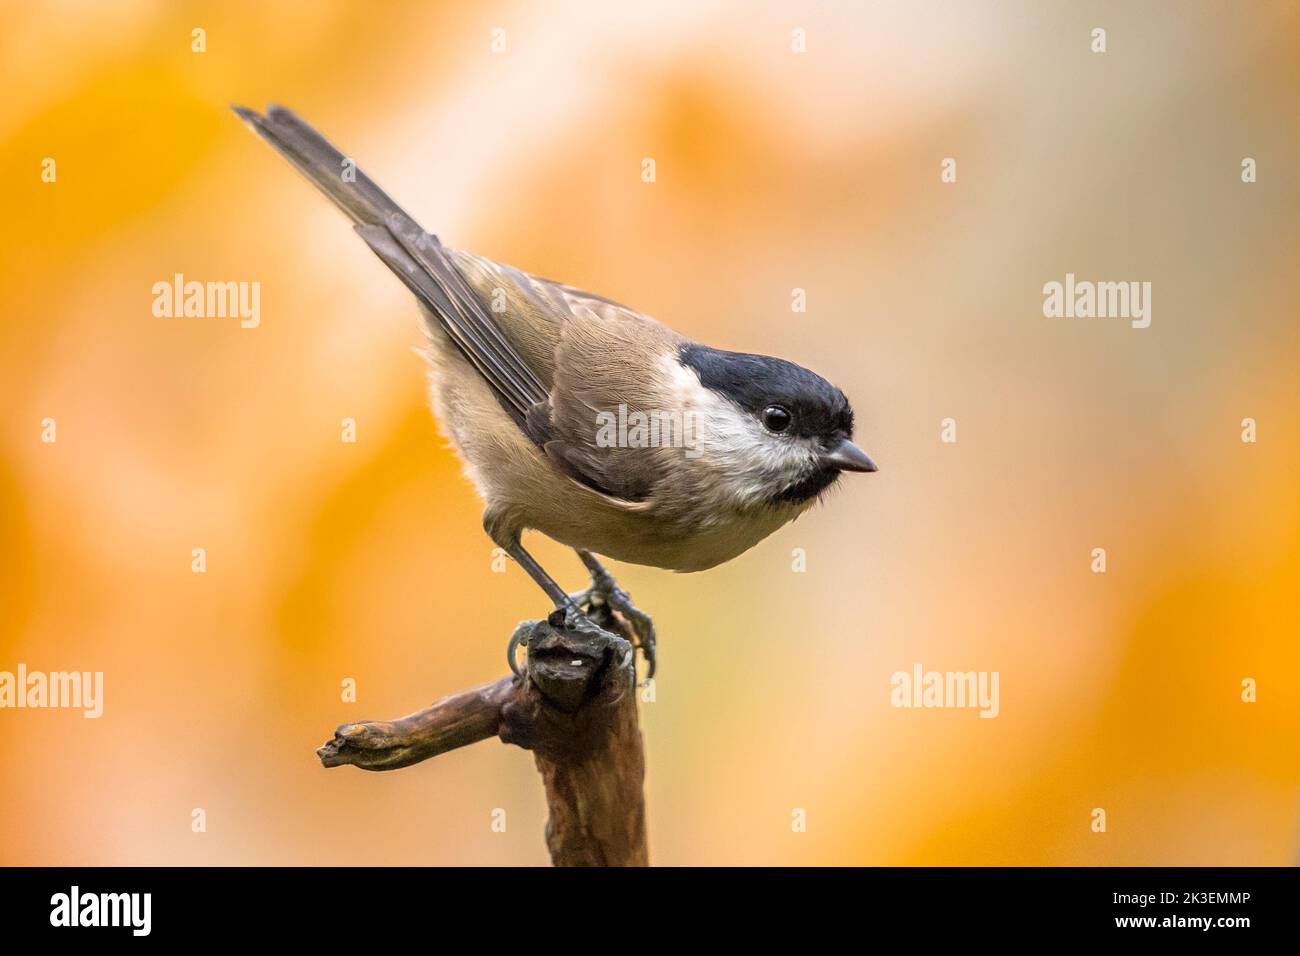 Willow tit (Poecile montanus). Songbird perched on branch against blurred colorful autumn background. Wildlife in nature. Bird in the garden. Netherla Stock Photo